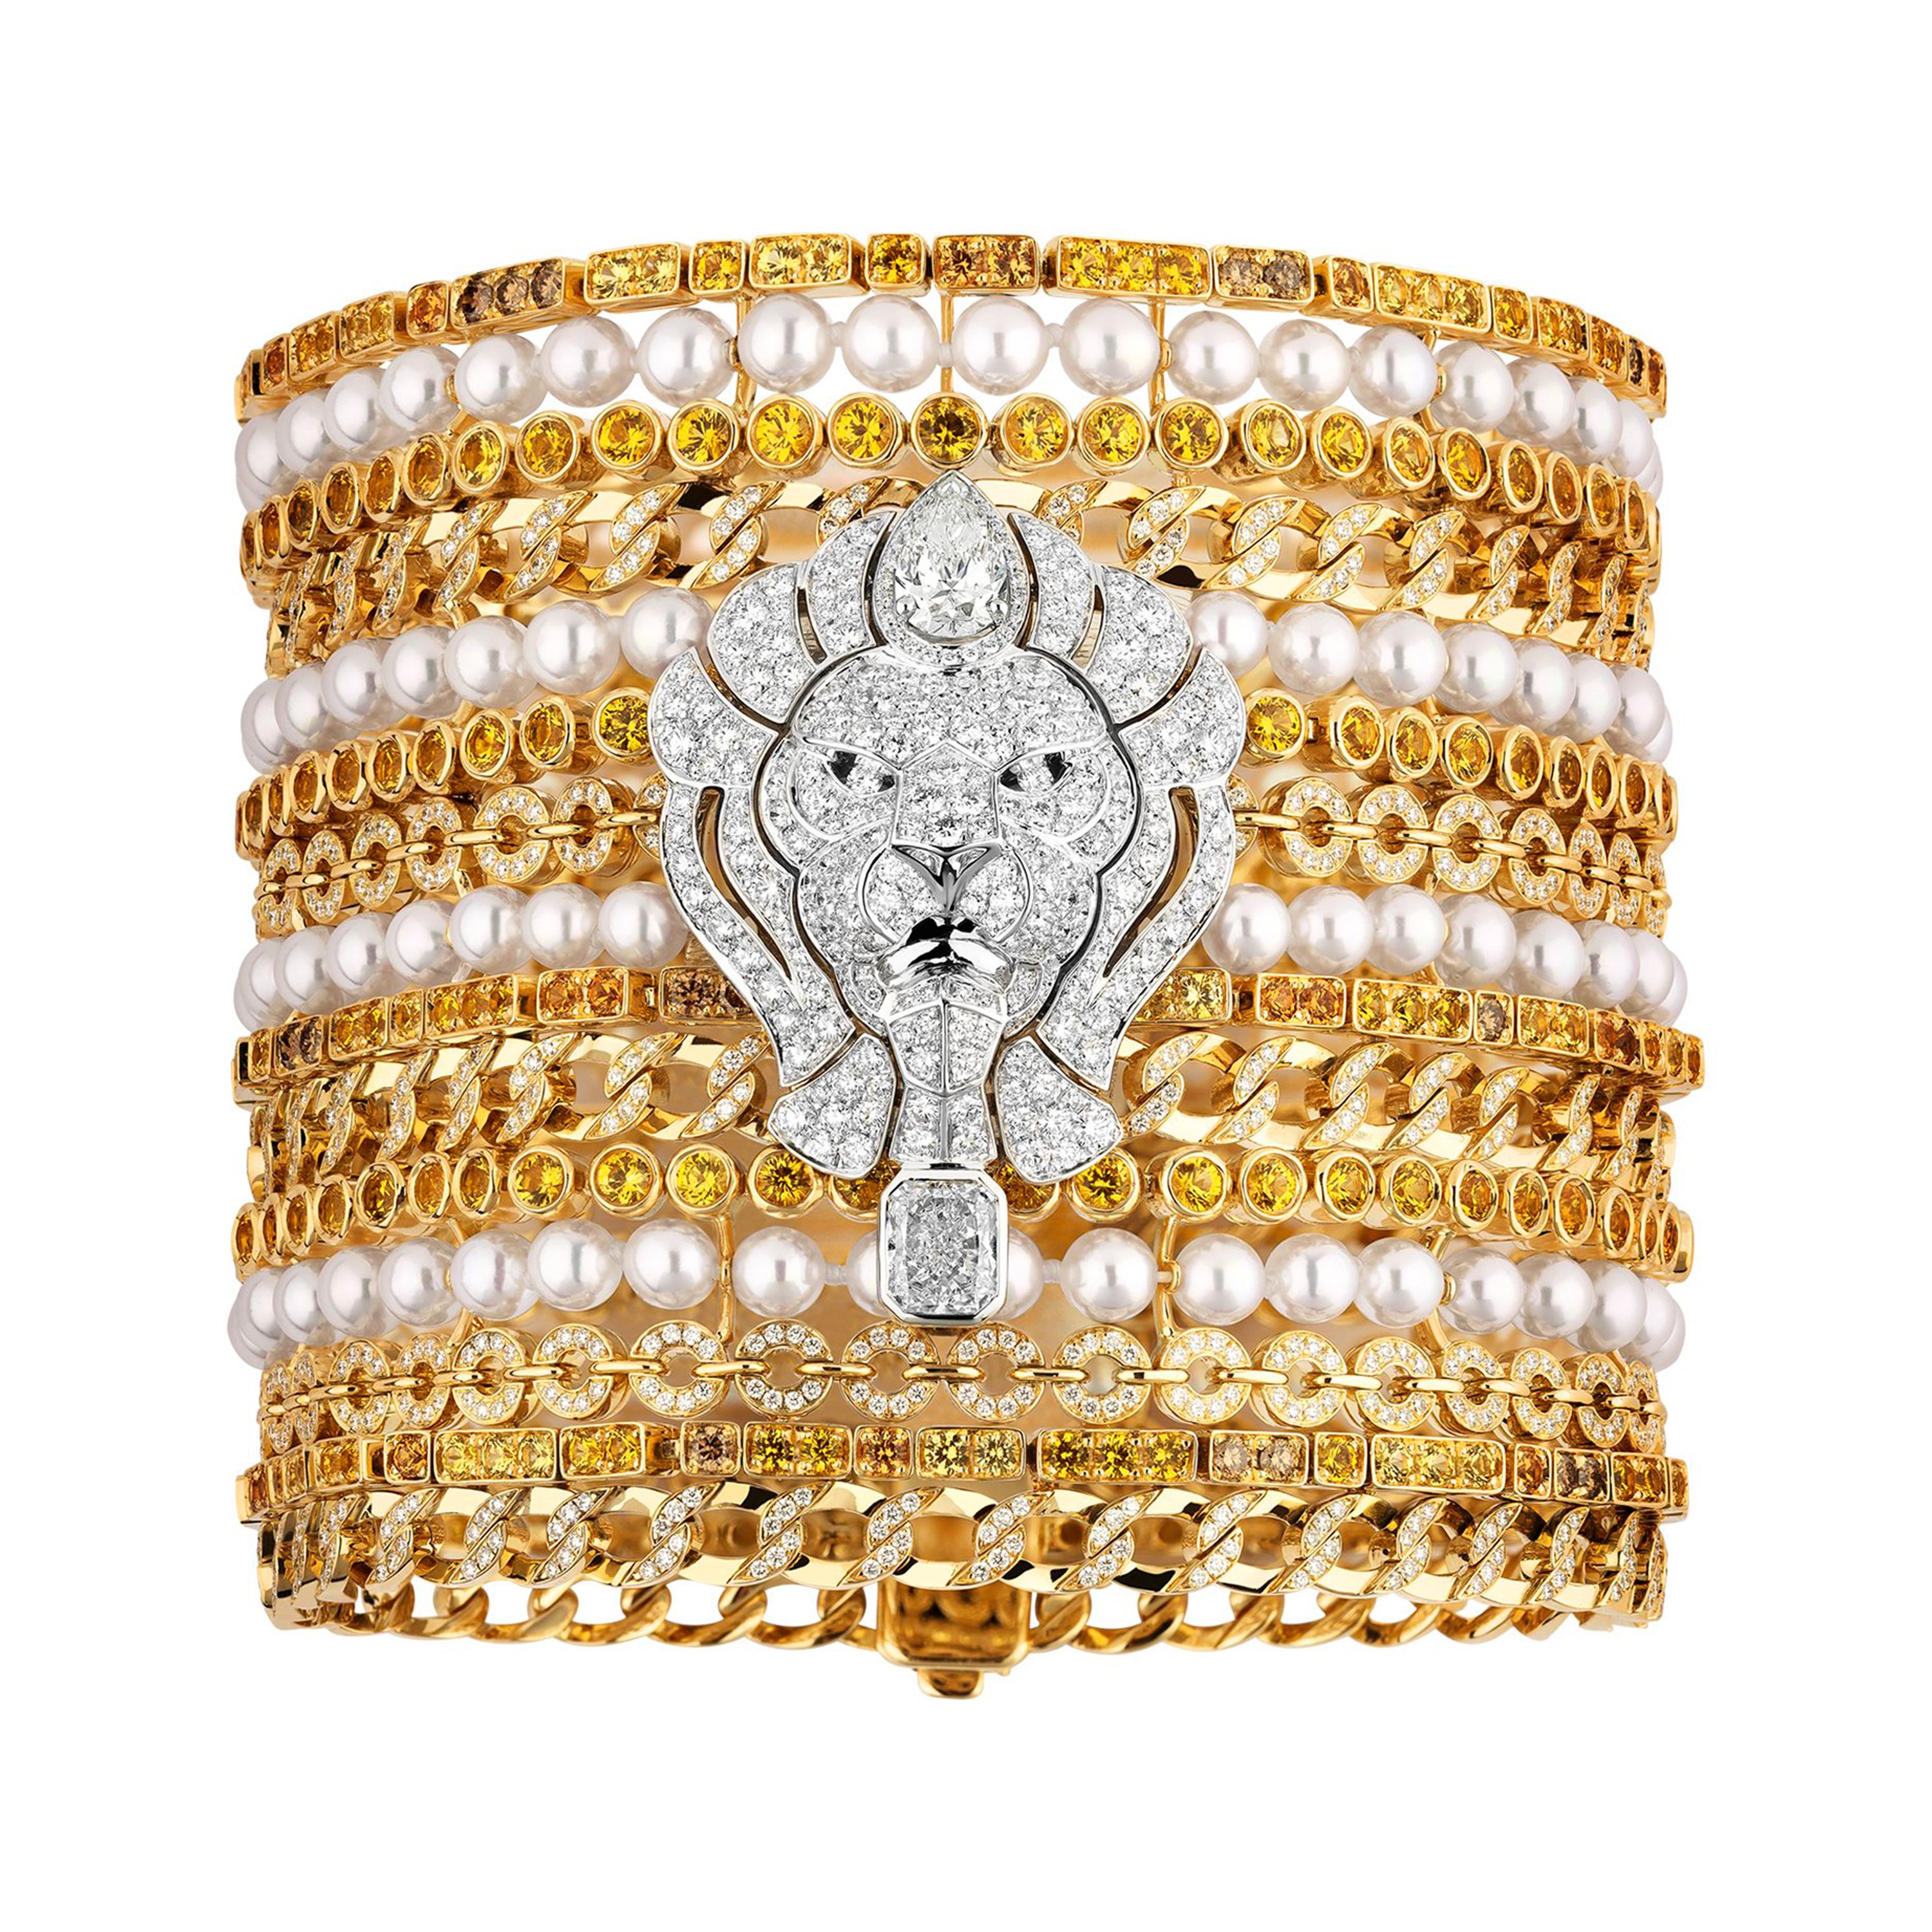 Chanel High Jewelry cuff in 18k white and yellow gold from the L’Esprit du Lion collection